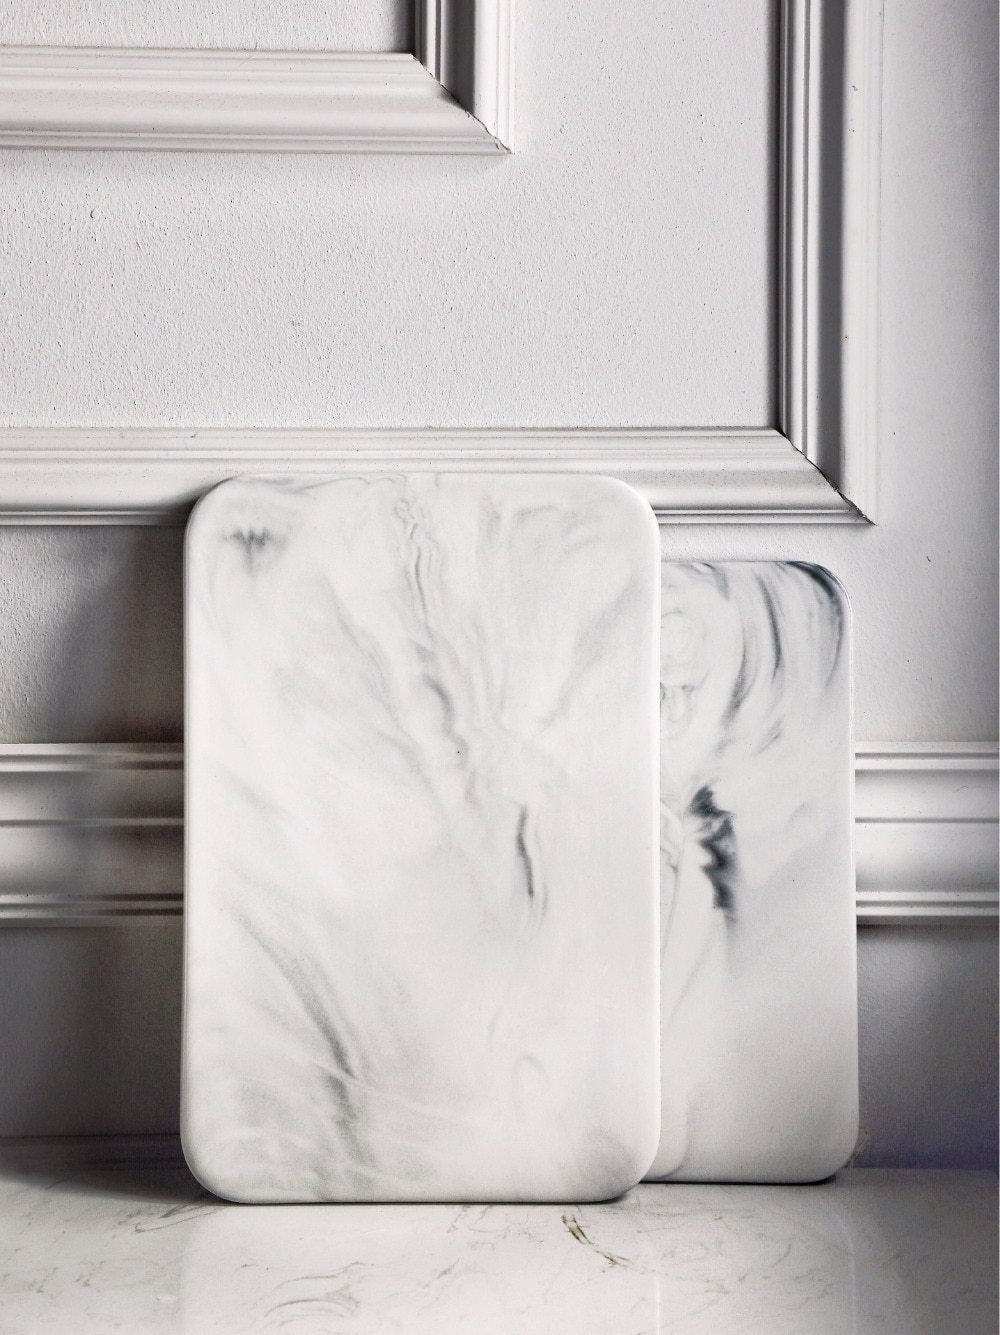 Marble Serving Dish